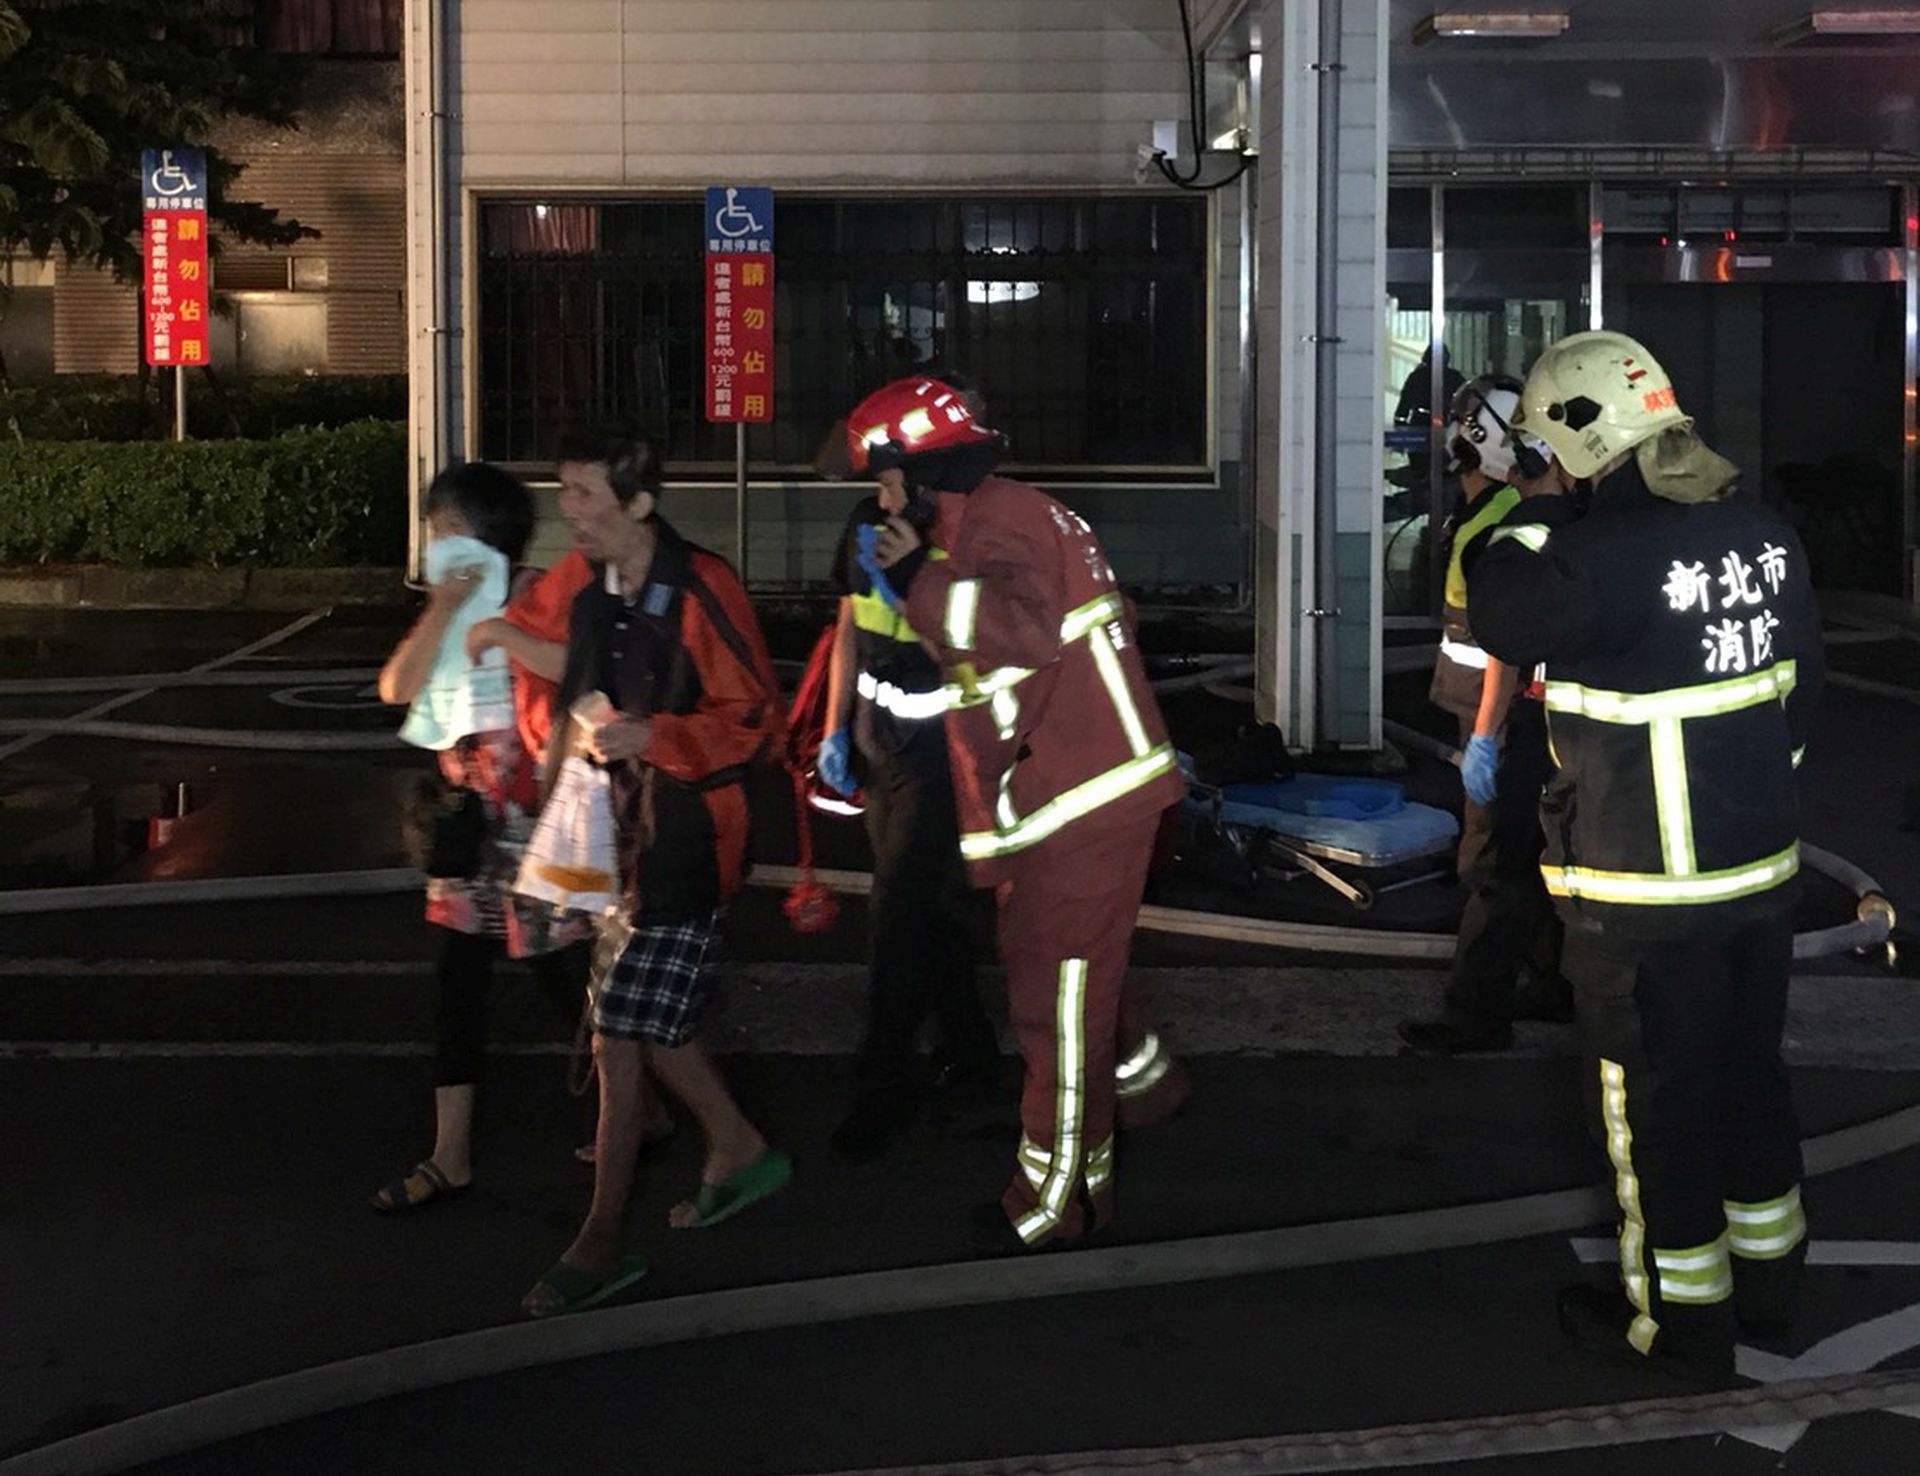 epa06947321 A handout photo made available by the New Taipei City Fire Department shows patients being evacuated during a fire at the Taipei Hospital in Hsinchuang, New Taipei City, Taiwan, 13 August 2018. The fire, which started in a ward on seventh floor, left at least 9 patients dead and 16 patients injured. The cause of the fire is being investigated.  EPA/NEW TAIPEI CITY FIRE DEPARTMENT / HANDOUT BEST QUALITY AVAILABLE HANDOUT EDITORIAL USE ONLY/NO SALES